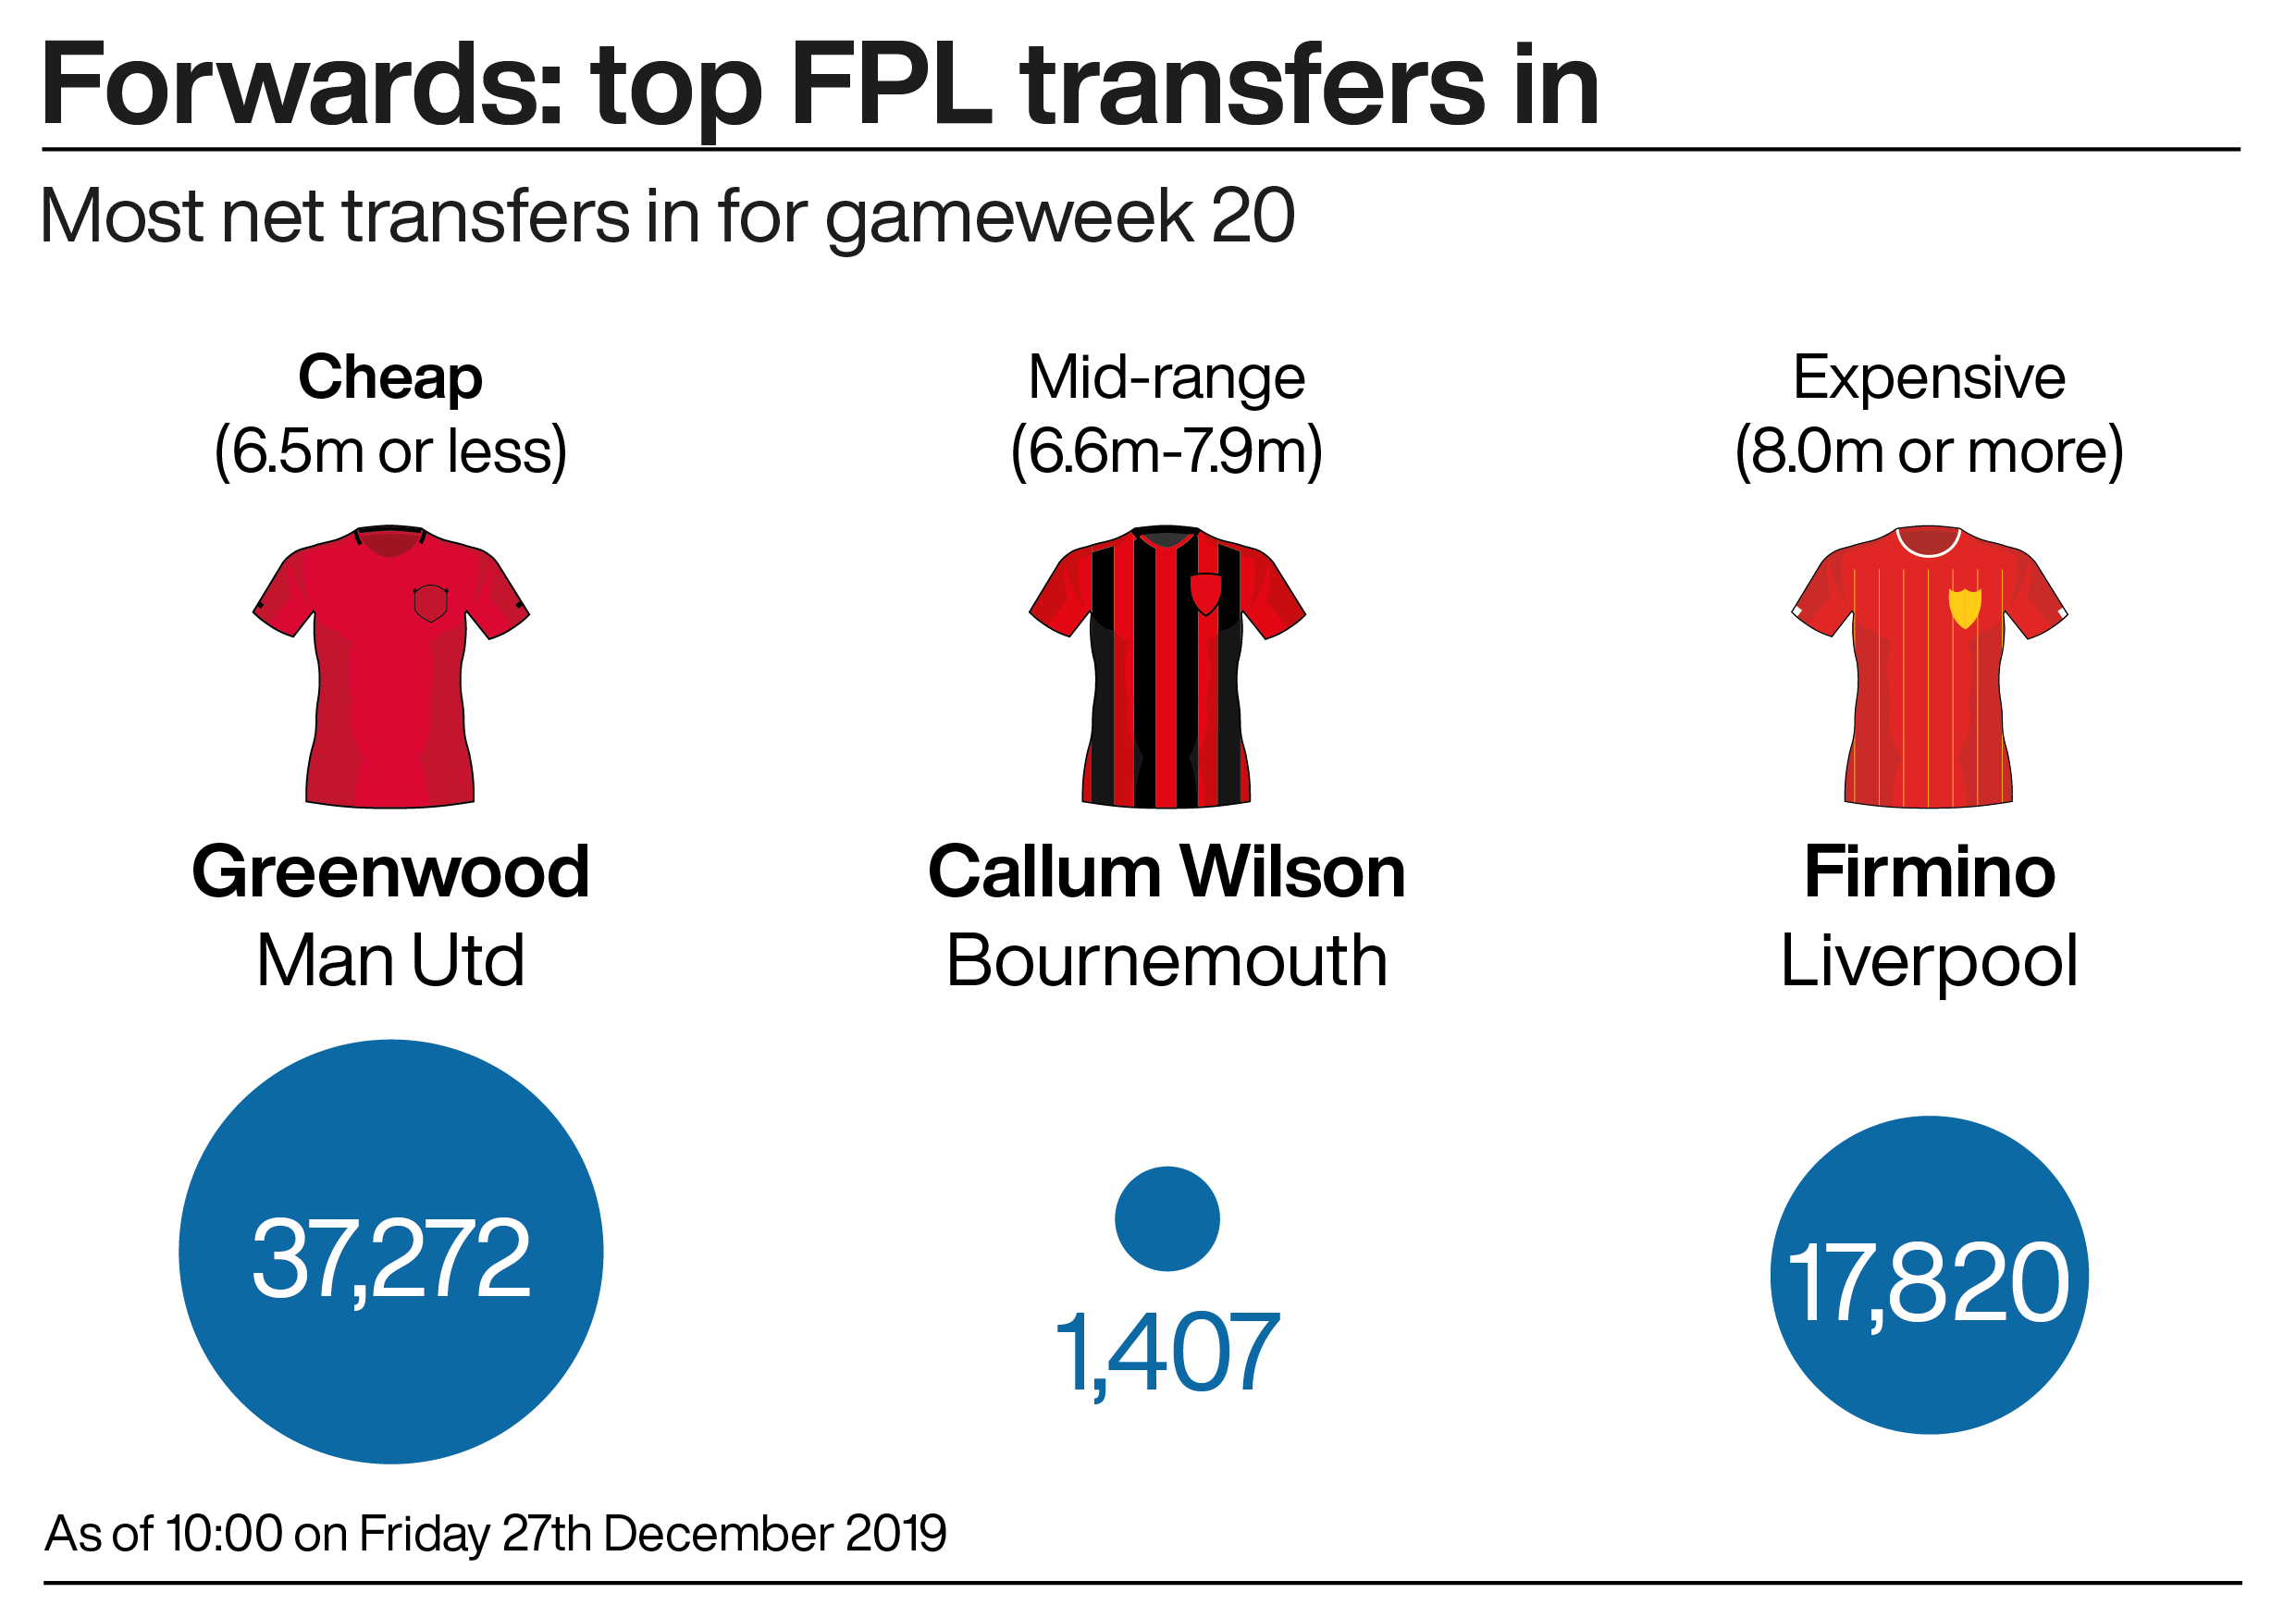 A graphic showing the most transferred in (net transfers) forwards in the Fantasy Premier League this week